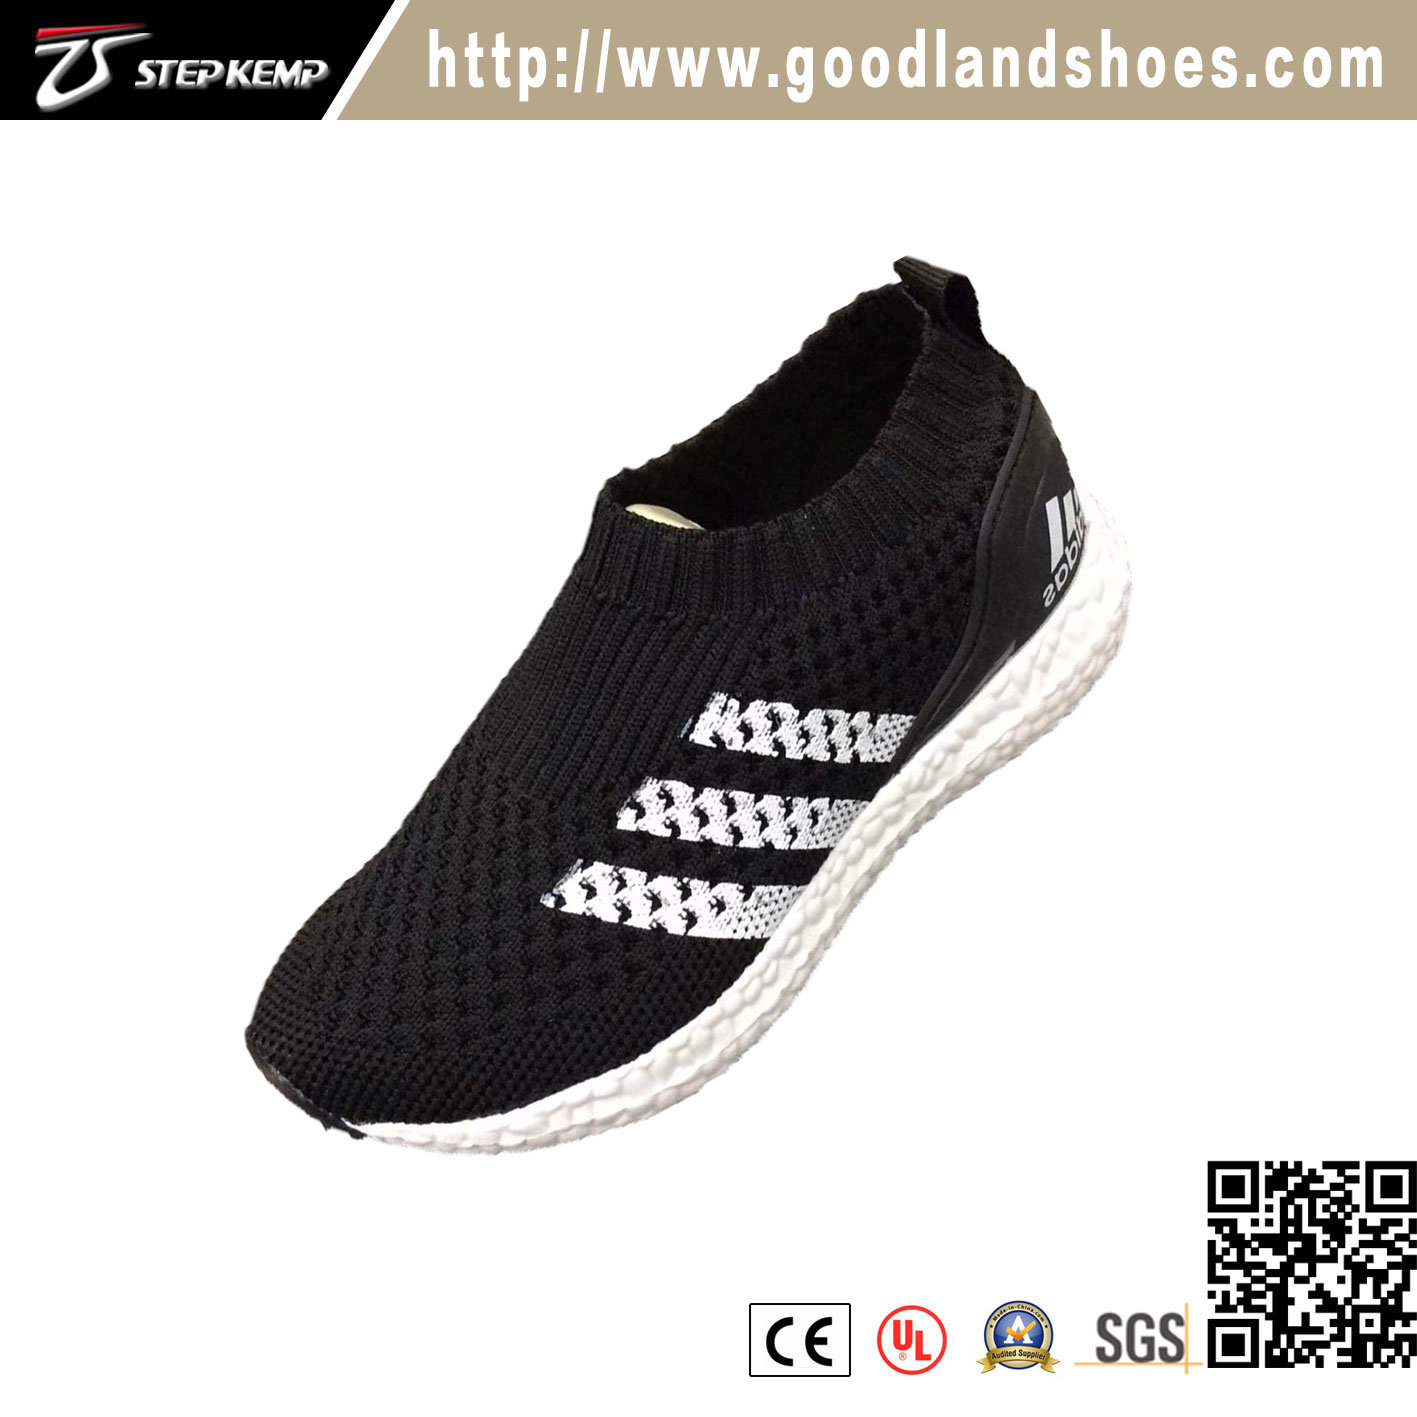 Stlye Slip-on Flyknit Casual Sports Shoes 20305-2